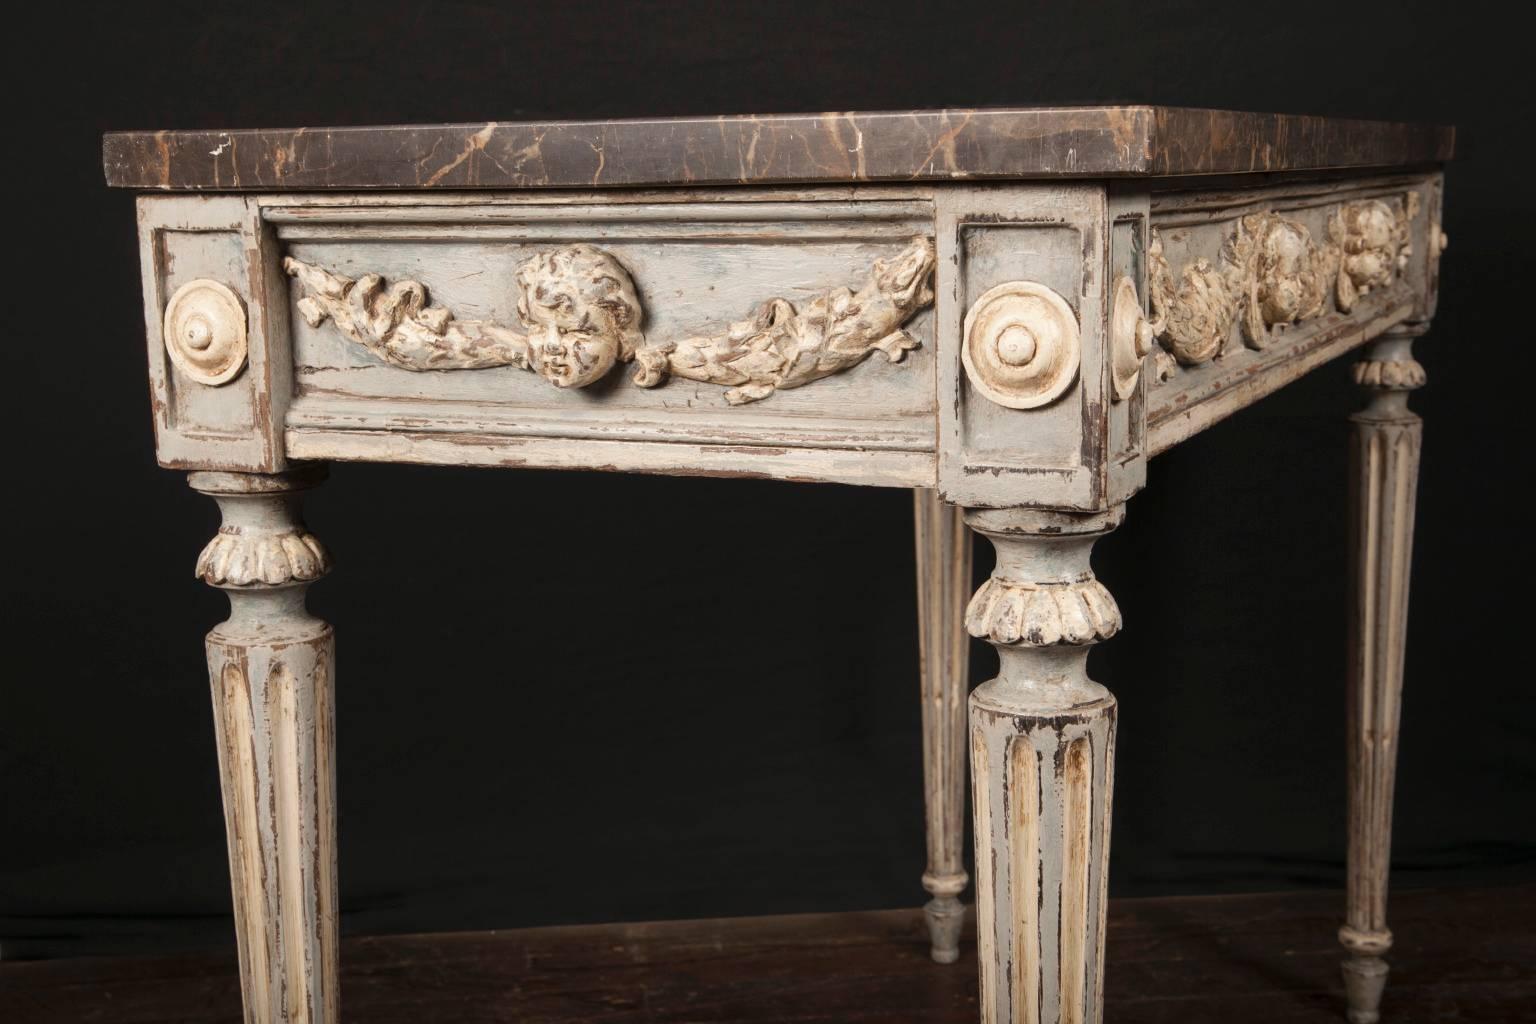 Handmade in the 18th century, this pair of antiques consoles is topped with a beautiful piece of gray marble with brown undertones and veins of white running through them. The consoles are made to be placed against a wall, with carved decorations